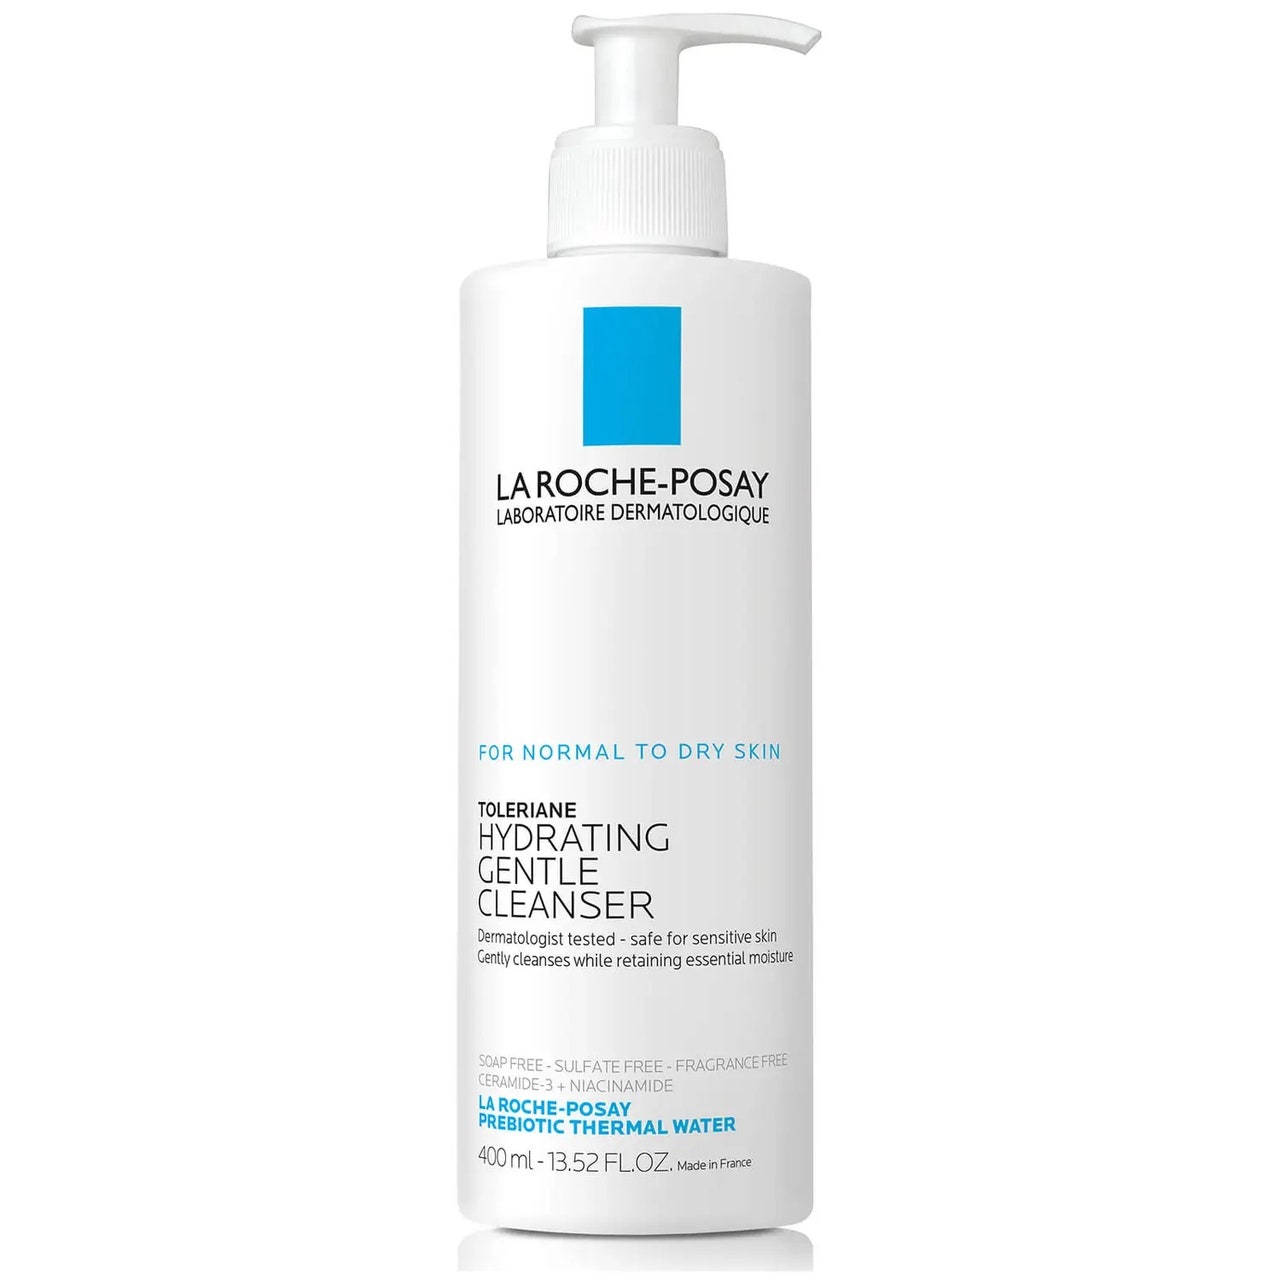 La Roche-Posay Toleriane Hydrating Gentle Cleanser on white background